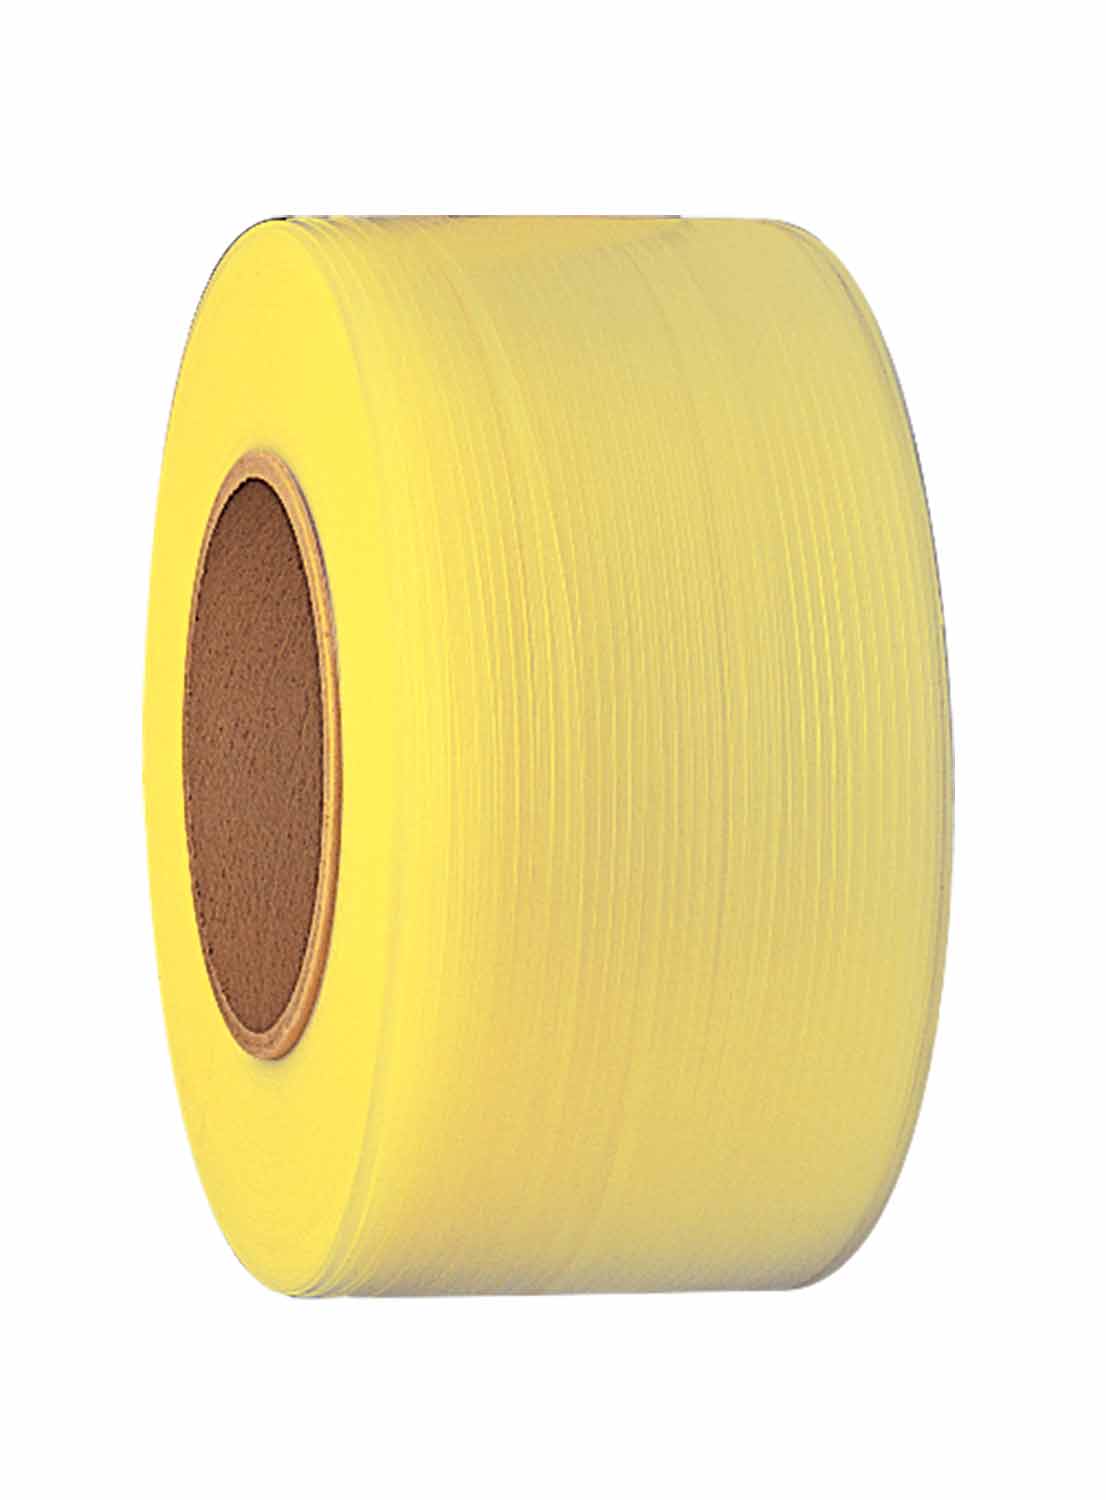 PLASTIC STRAPPING YELLOW 1/4&quot;
(6MM)
15O LB. 8X8 POLYPROPYLENE
SIGNODE CONTRAX